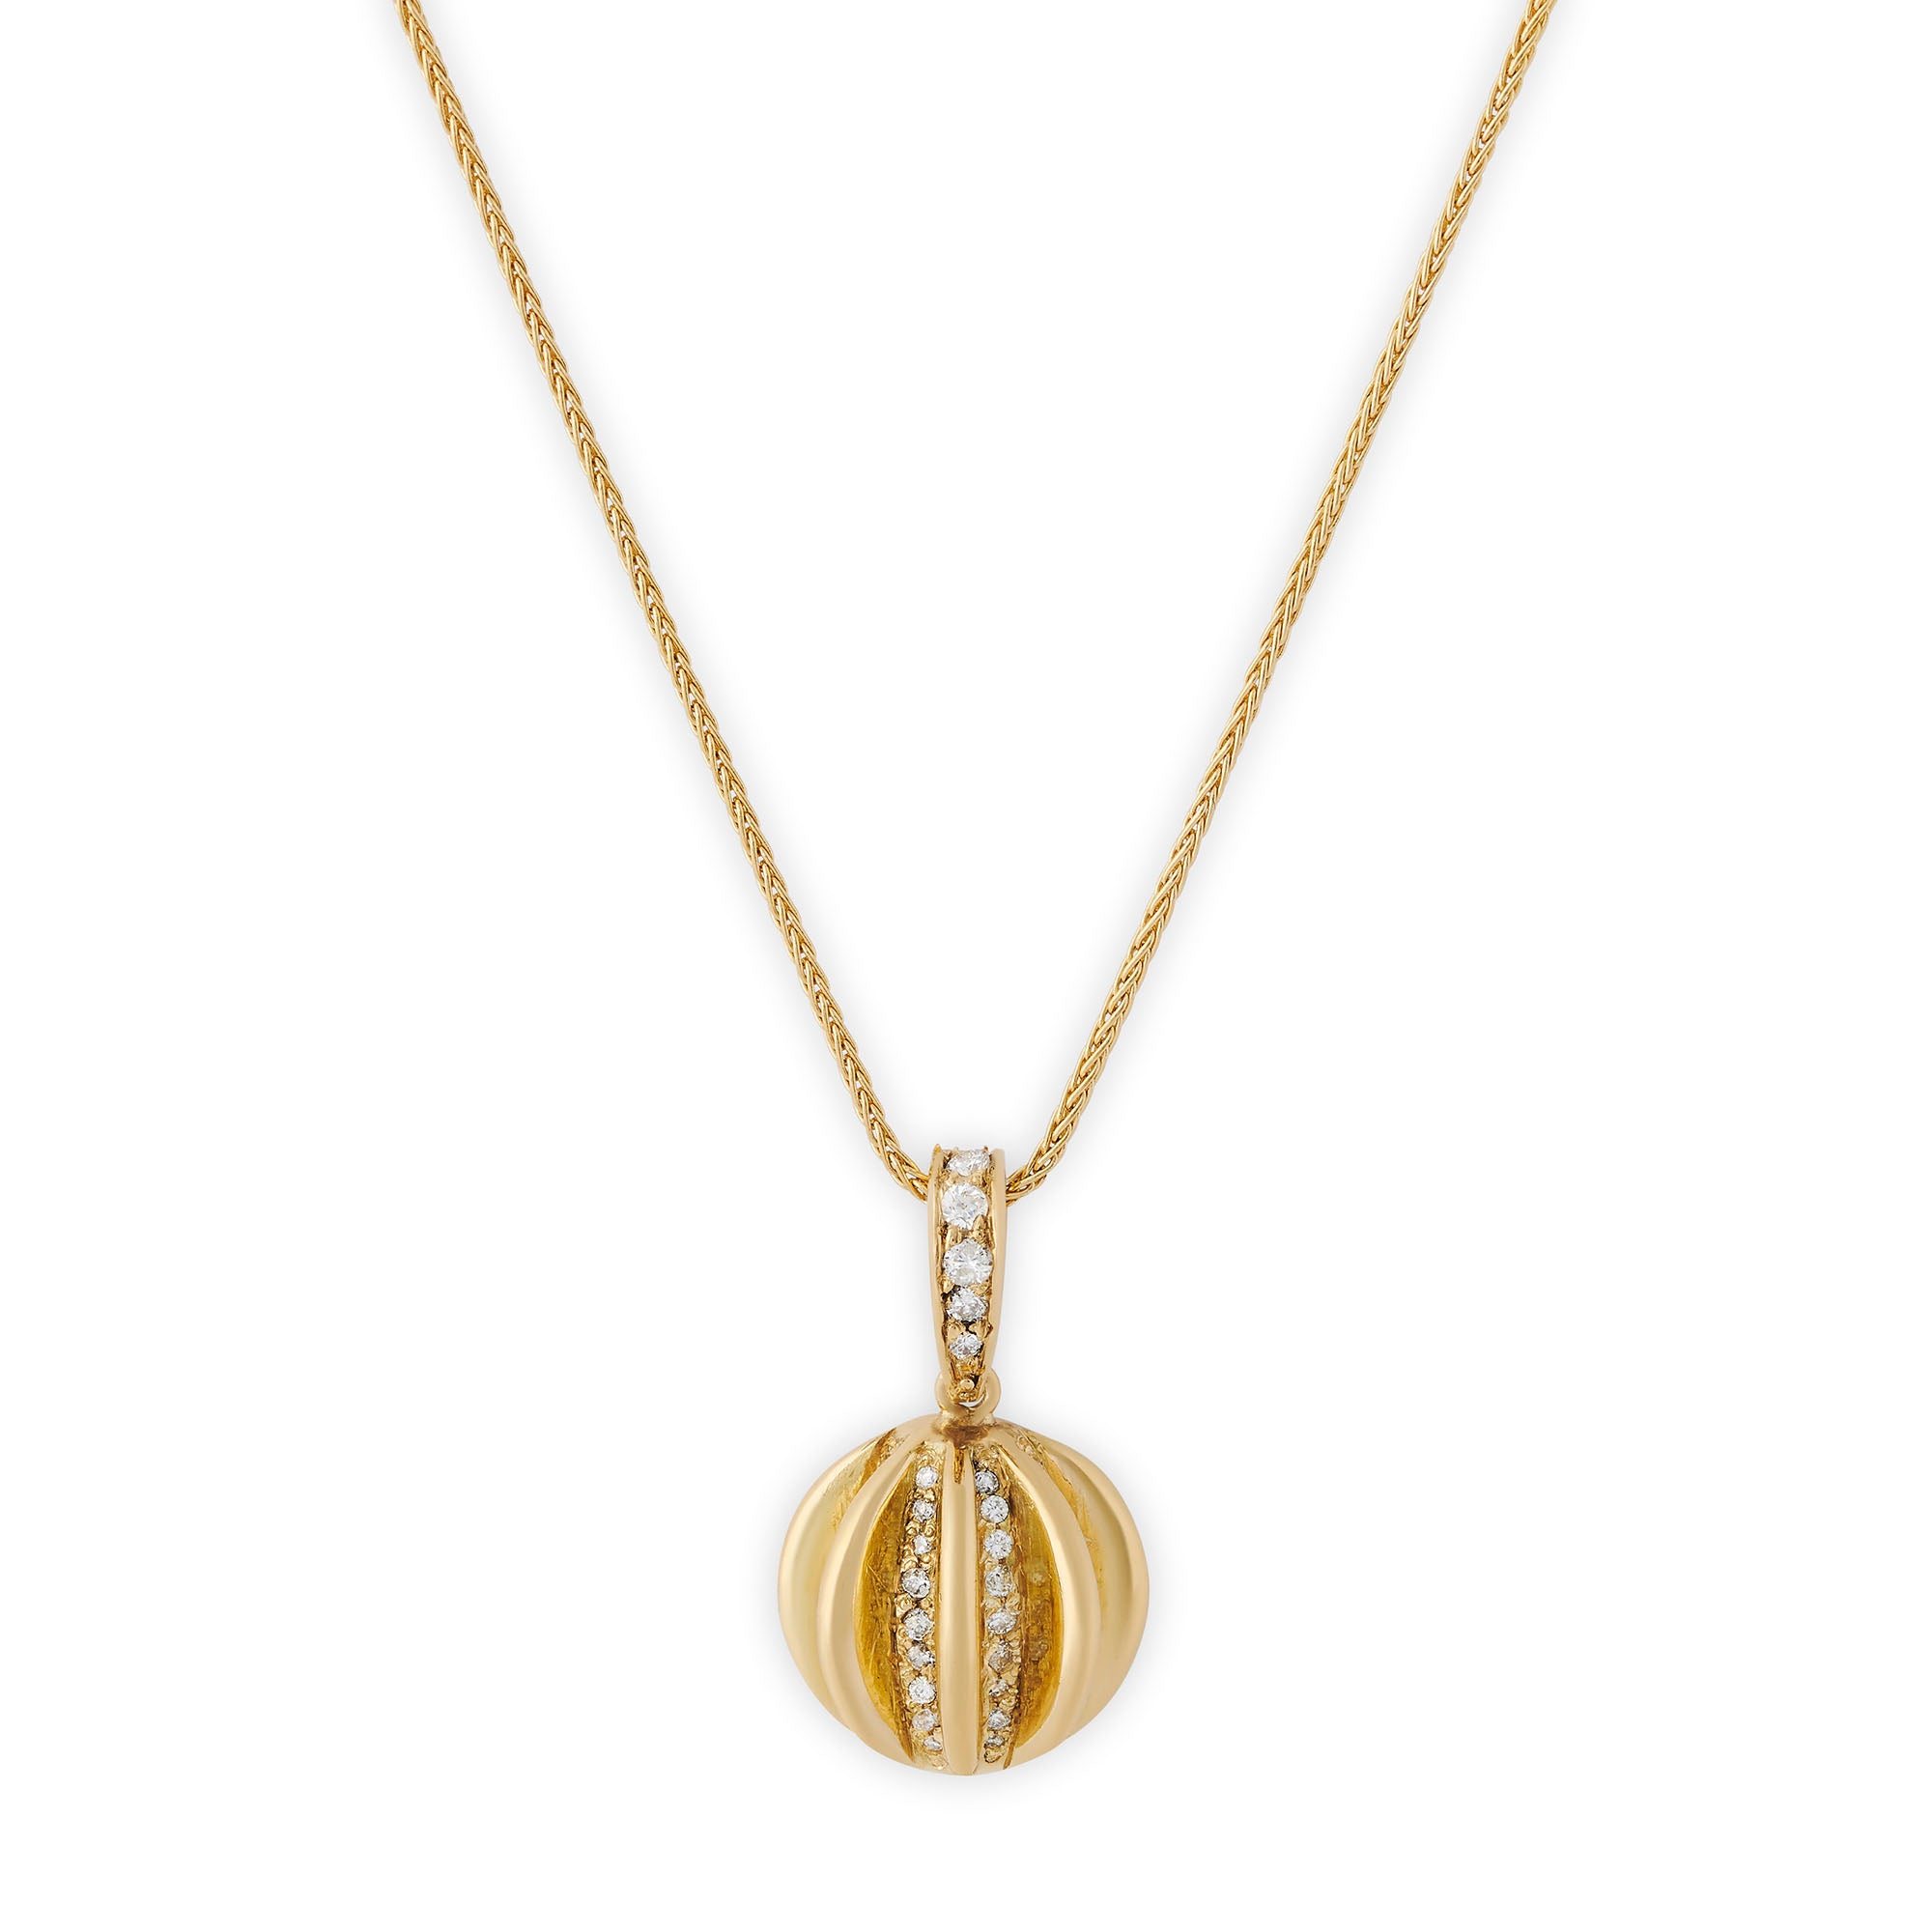 18ct yellow gold and diamond pendant by Nigel Milne